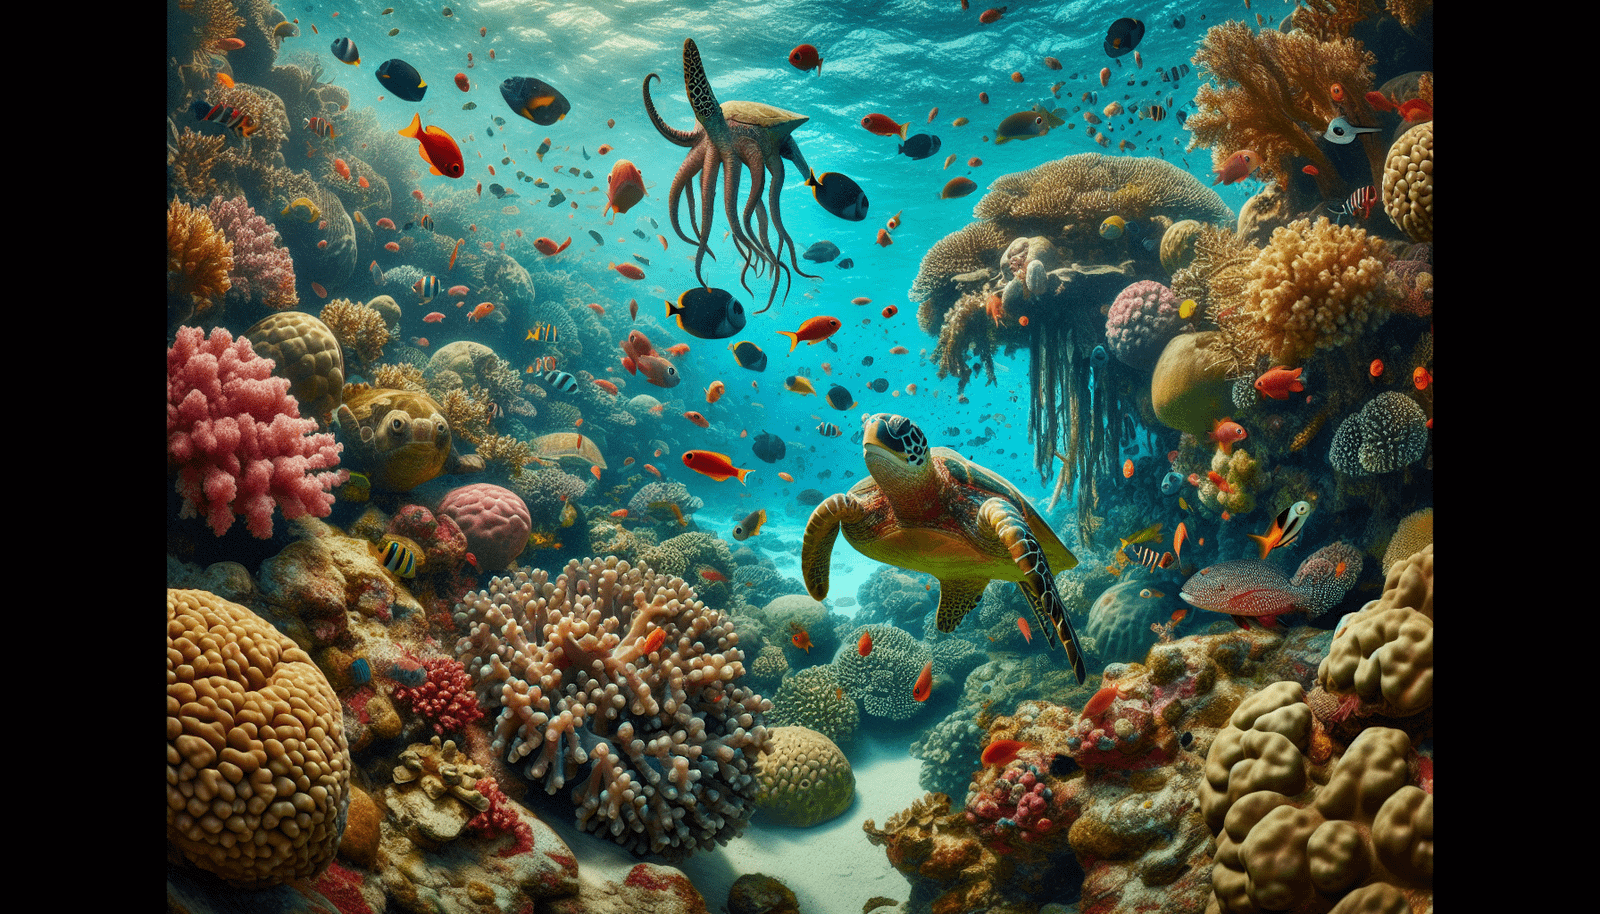 A diverse coral reef ecosystem with various species of fish, invertebrates, and marine mammals